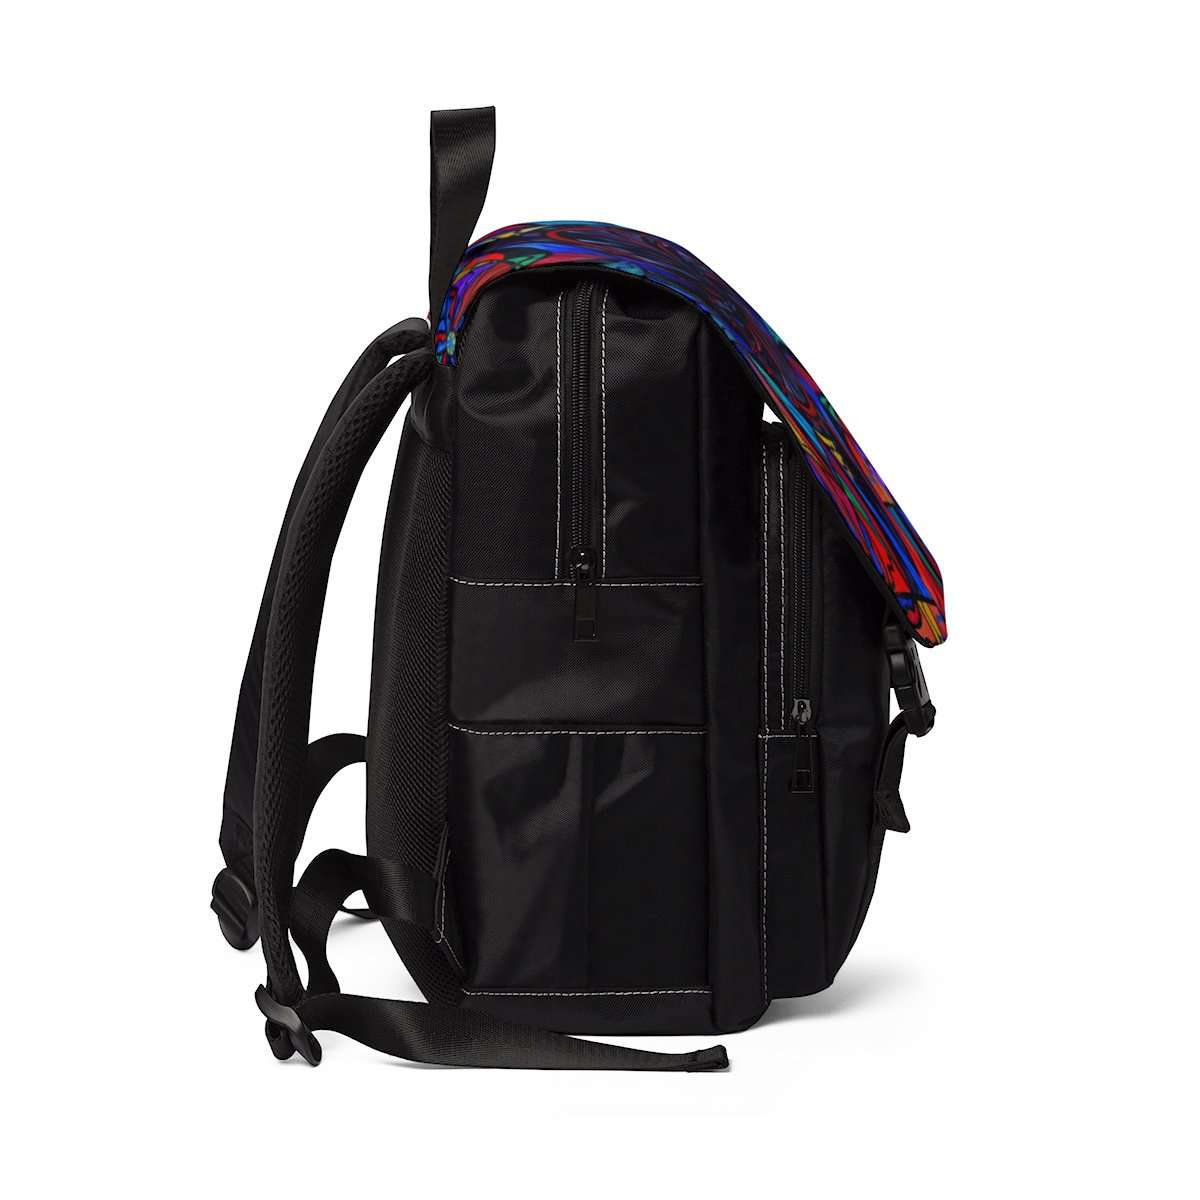 leaking-out-of-your-transforming-fear-unisex-casual-shoulder-backpack-hot-on-sale_1.jpg